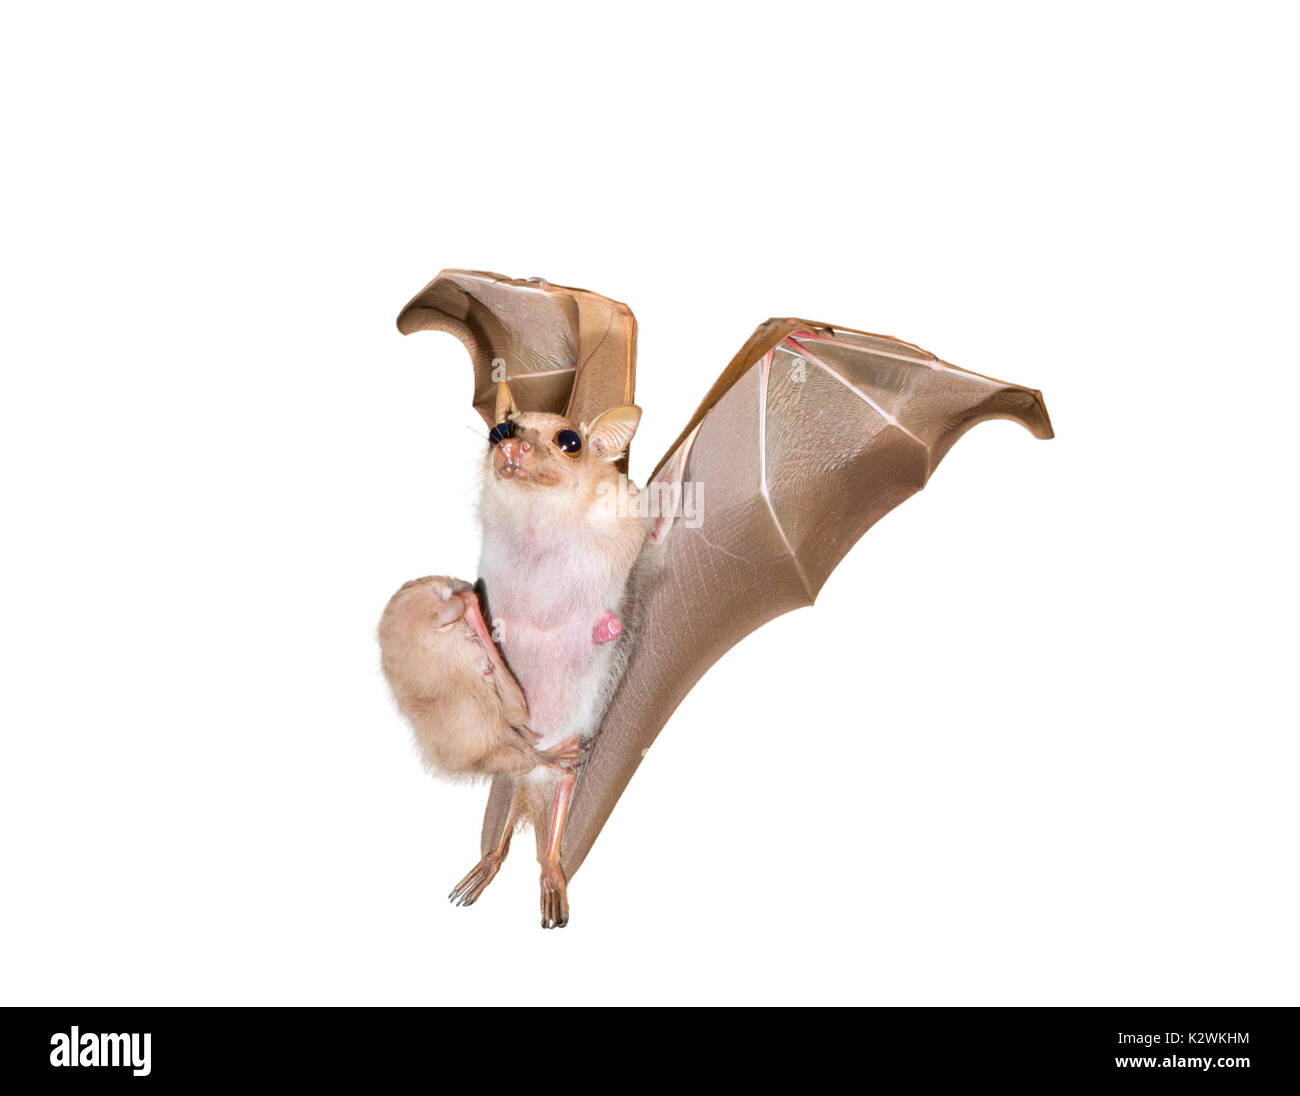 Peters' dwarf epauletted fruit bat (Micropteropus pusillus) flying with a pup clinging on its belly, isolated on white background. Stock Photo